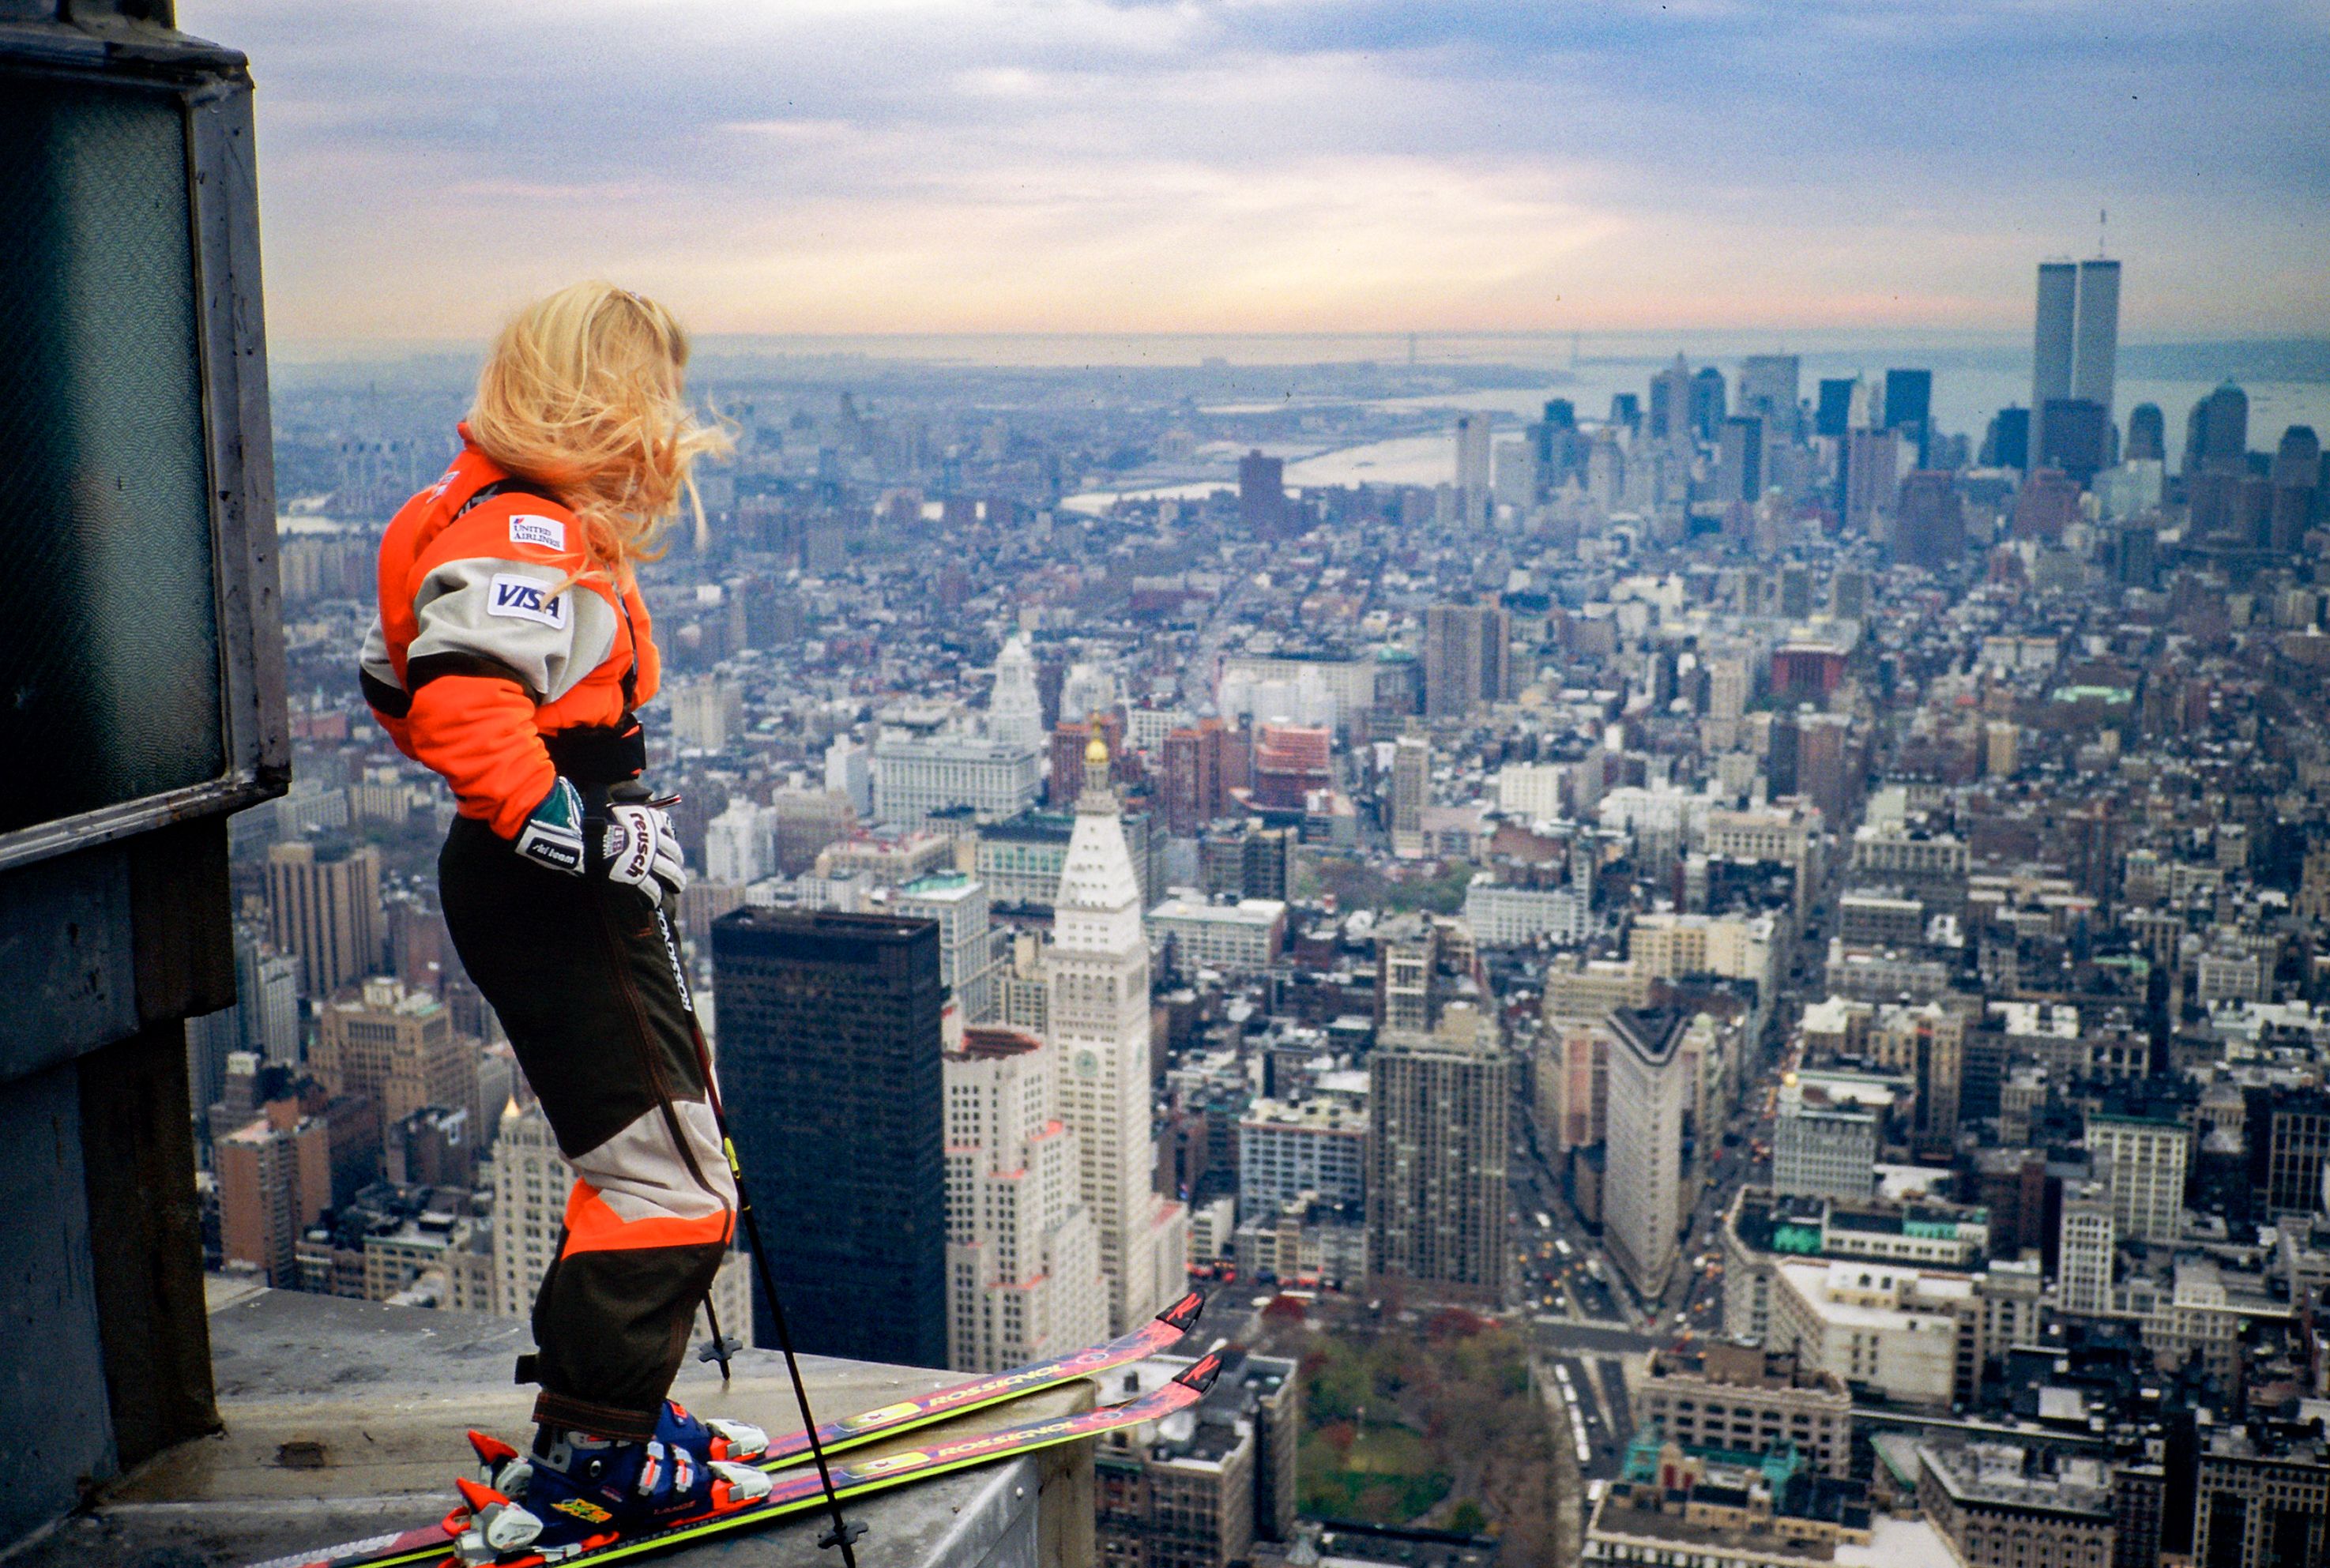 Olympic skier at top of Empire State Building